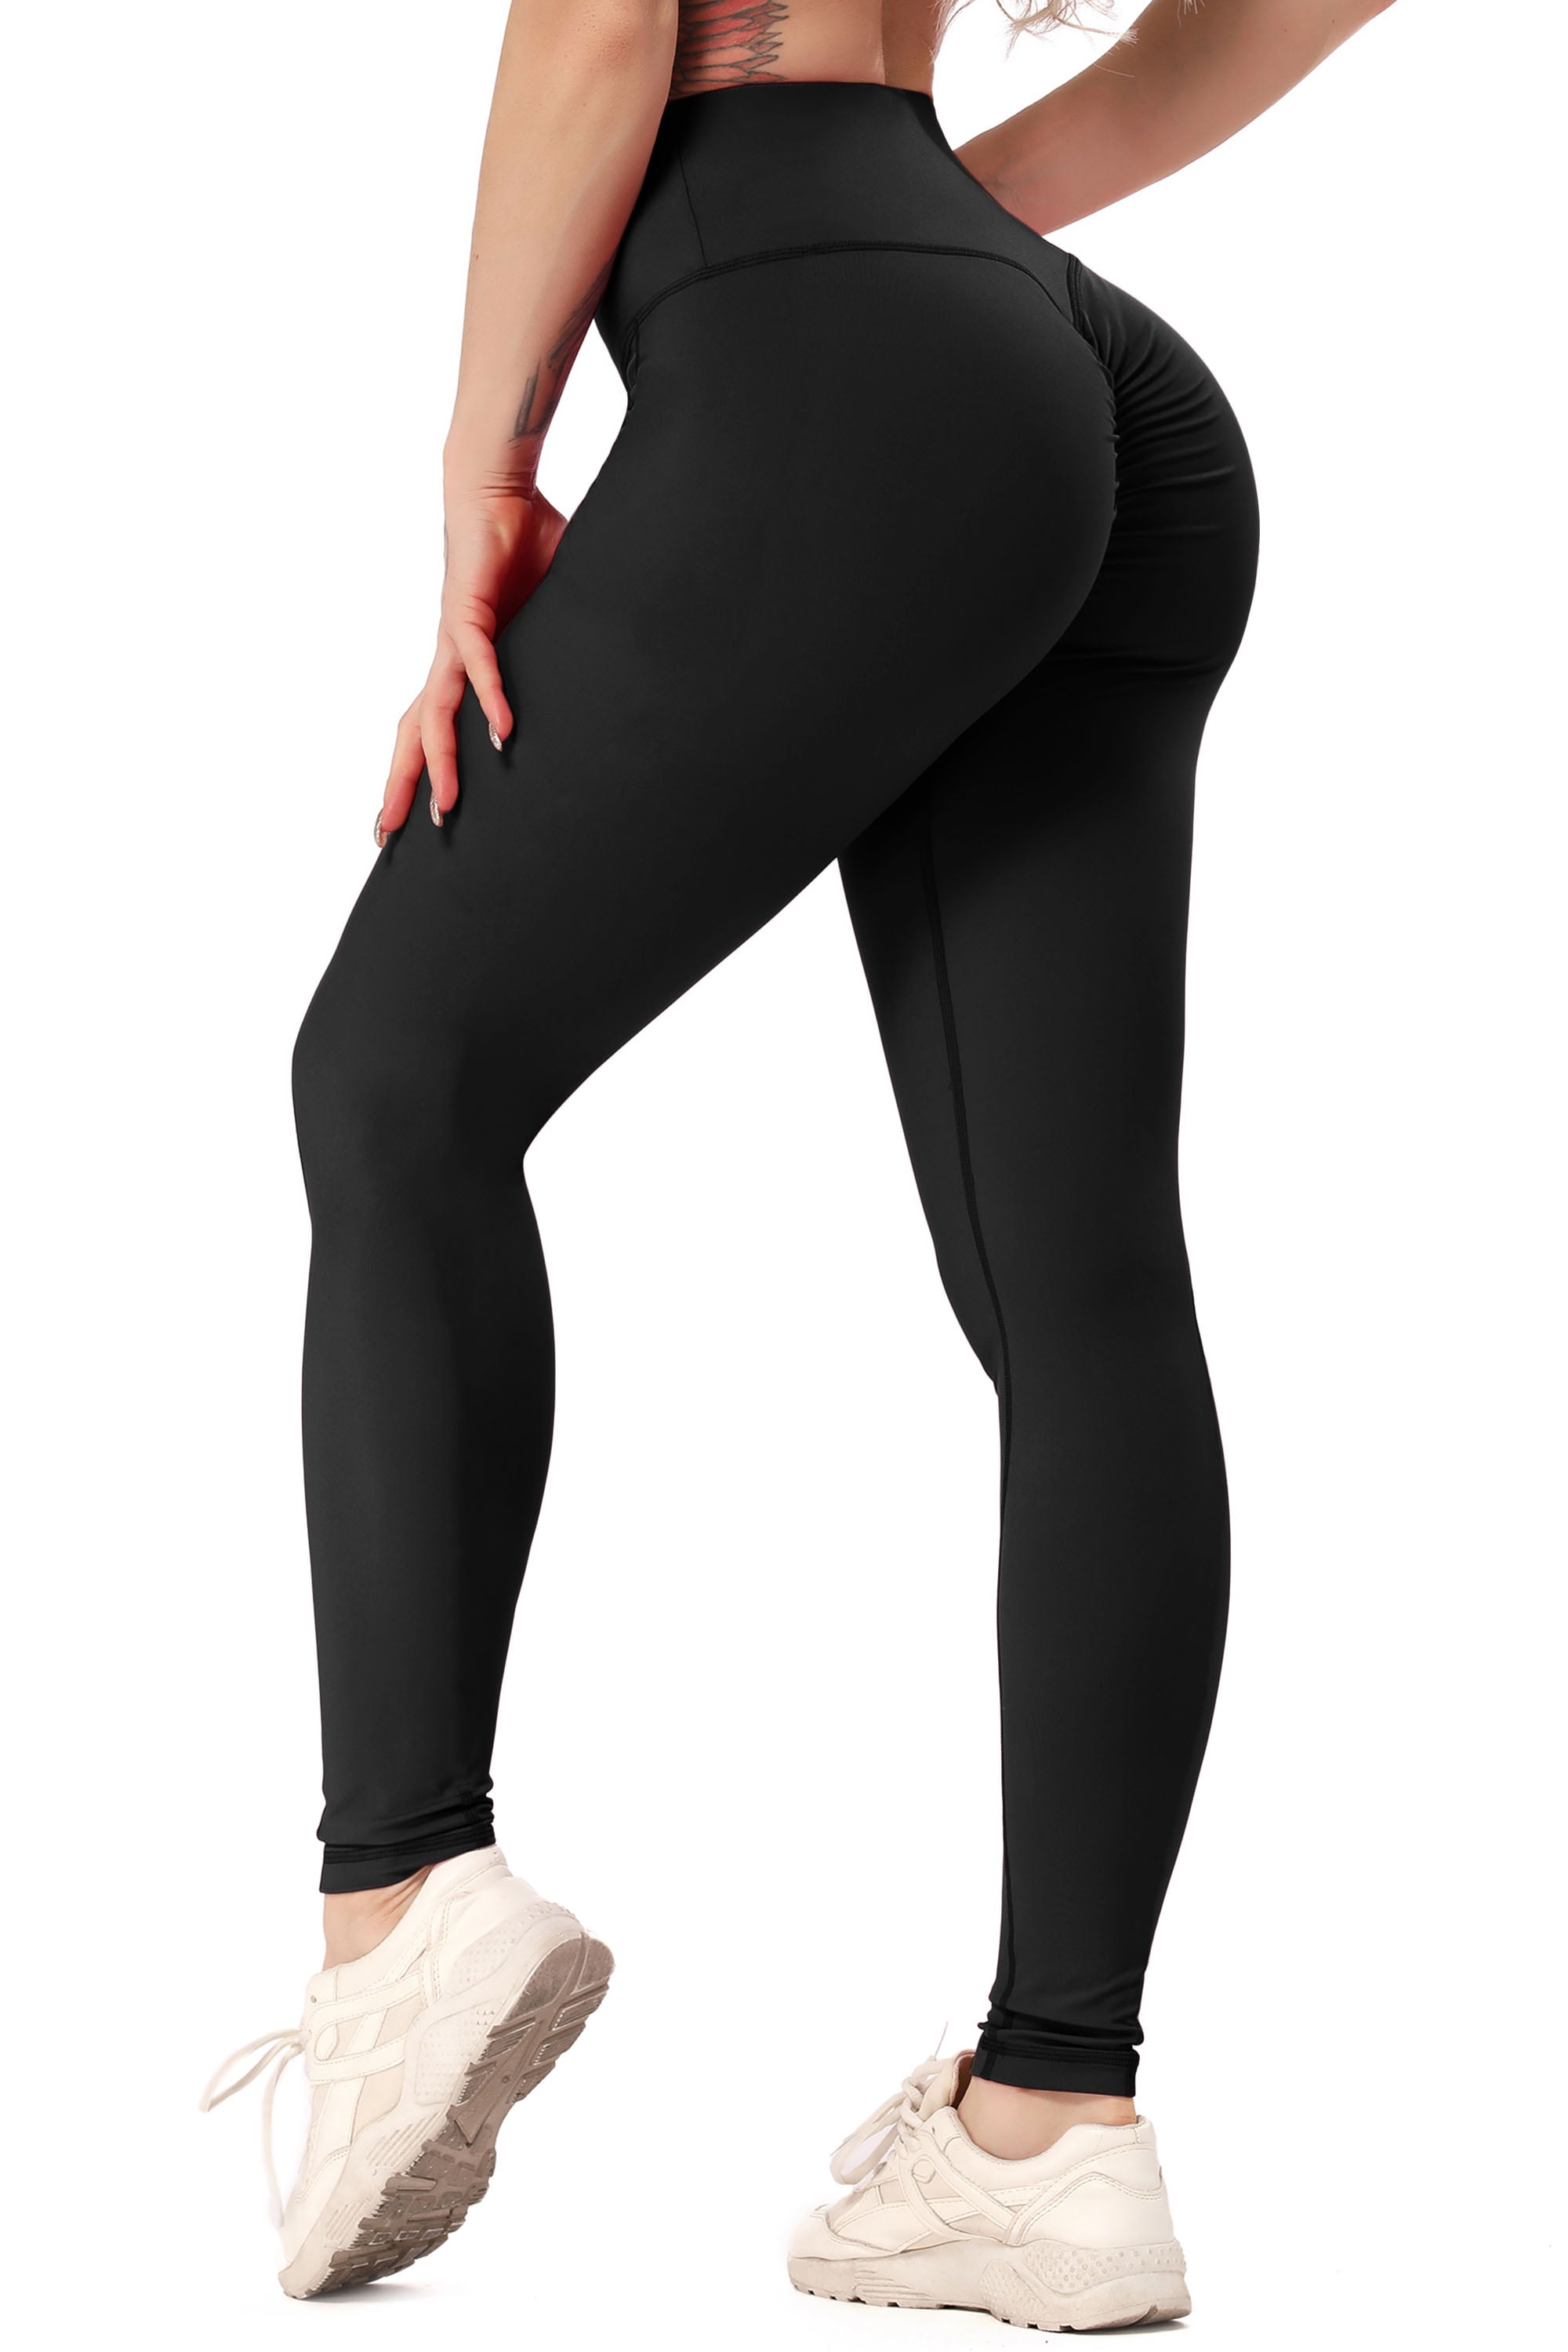 Womens Yoga Pants High Waist Scrunch Ruched Butt Lifting Workout Leggings Sport Fitness Gym Push Up Tights by RQWEIN